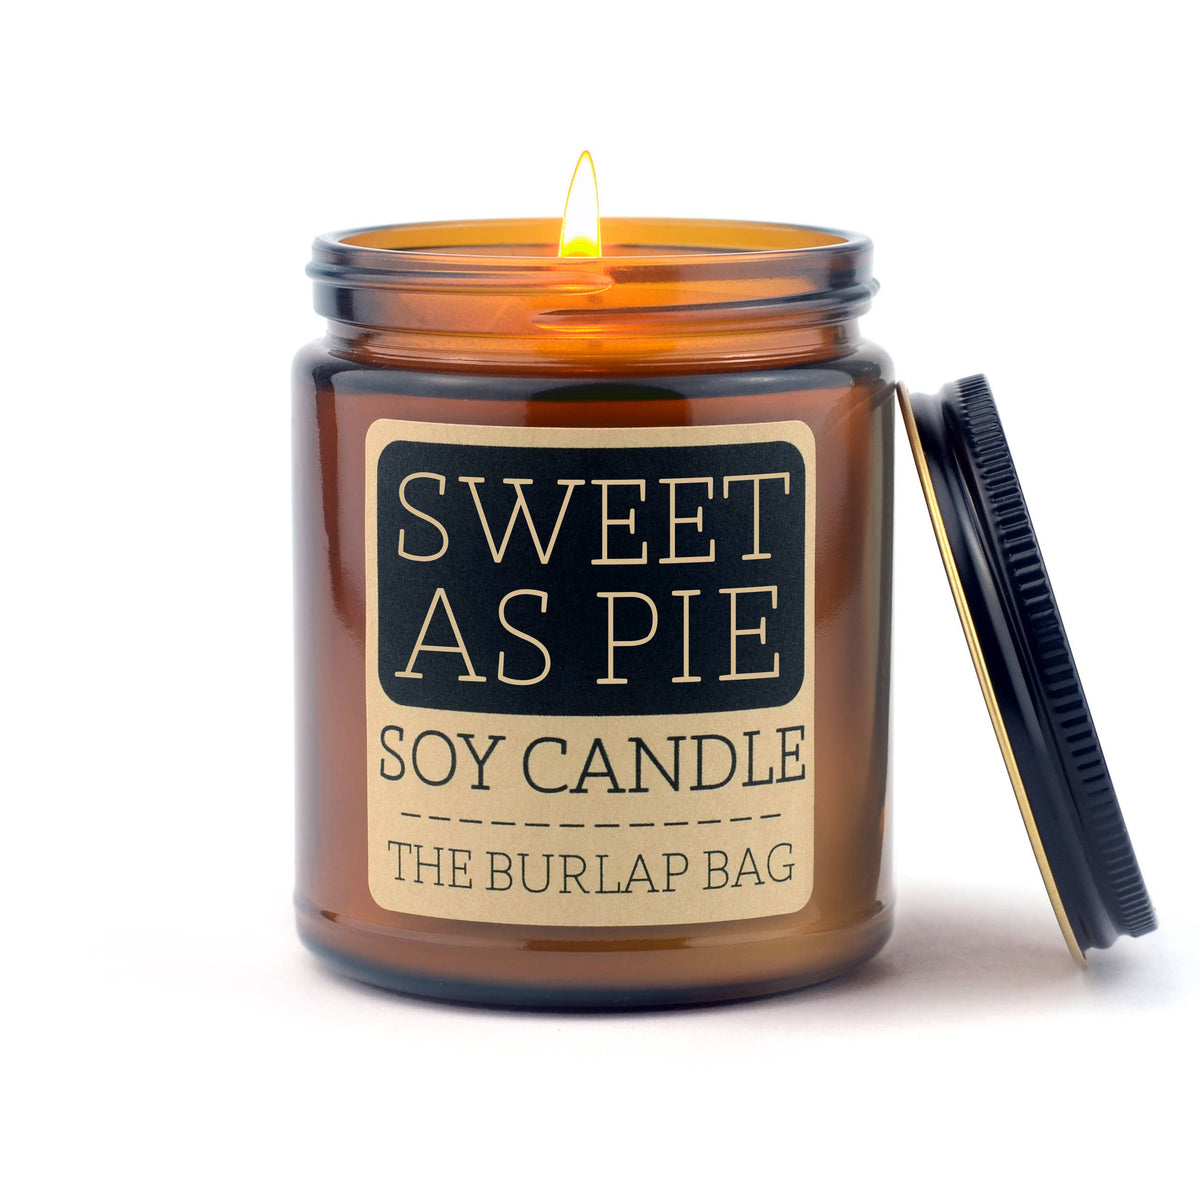 Sweet As Pie - Soy Candle 9oz